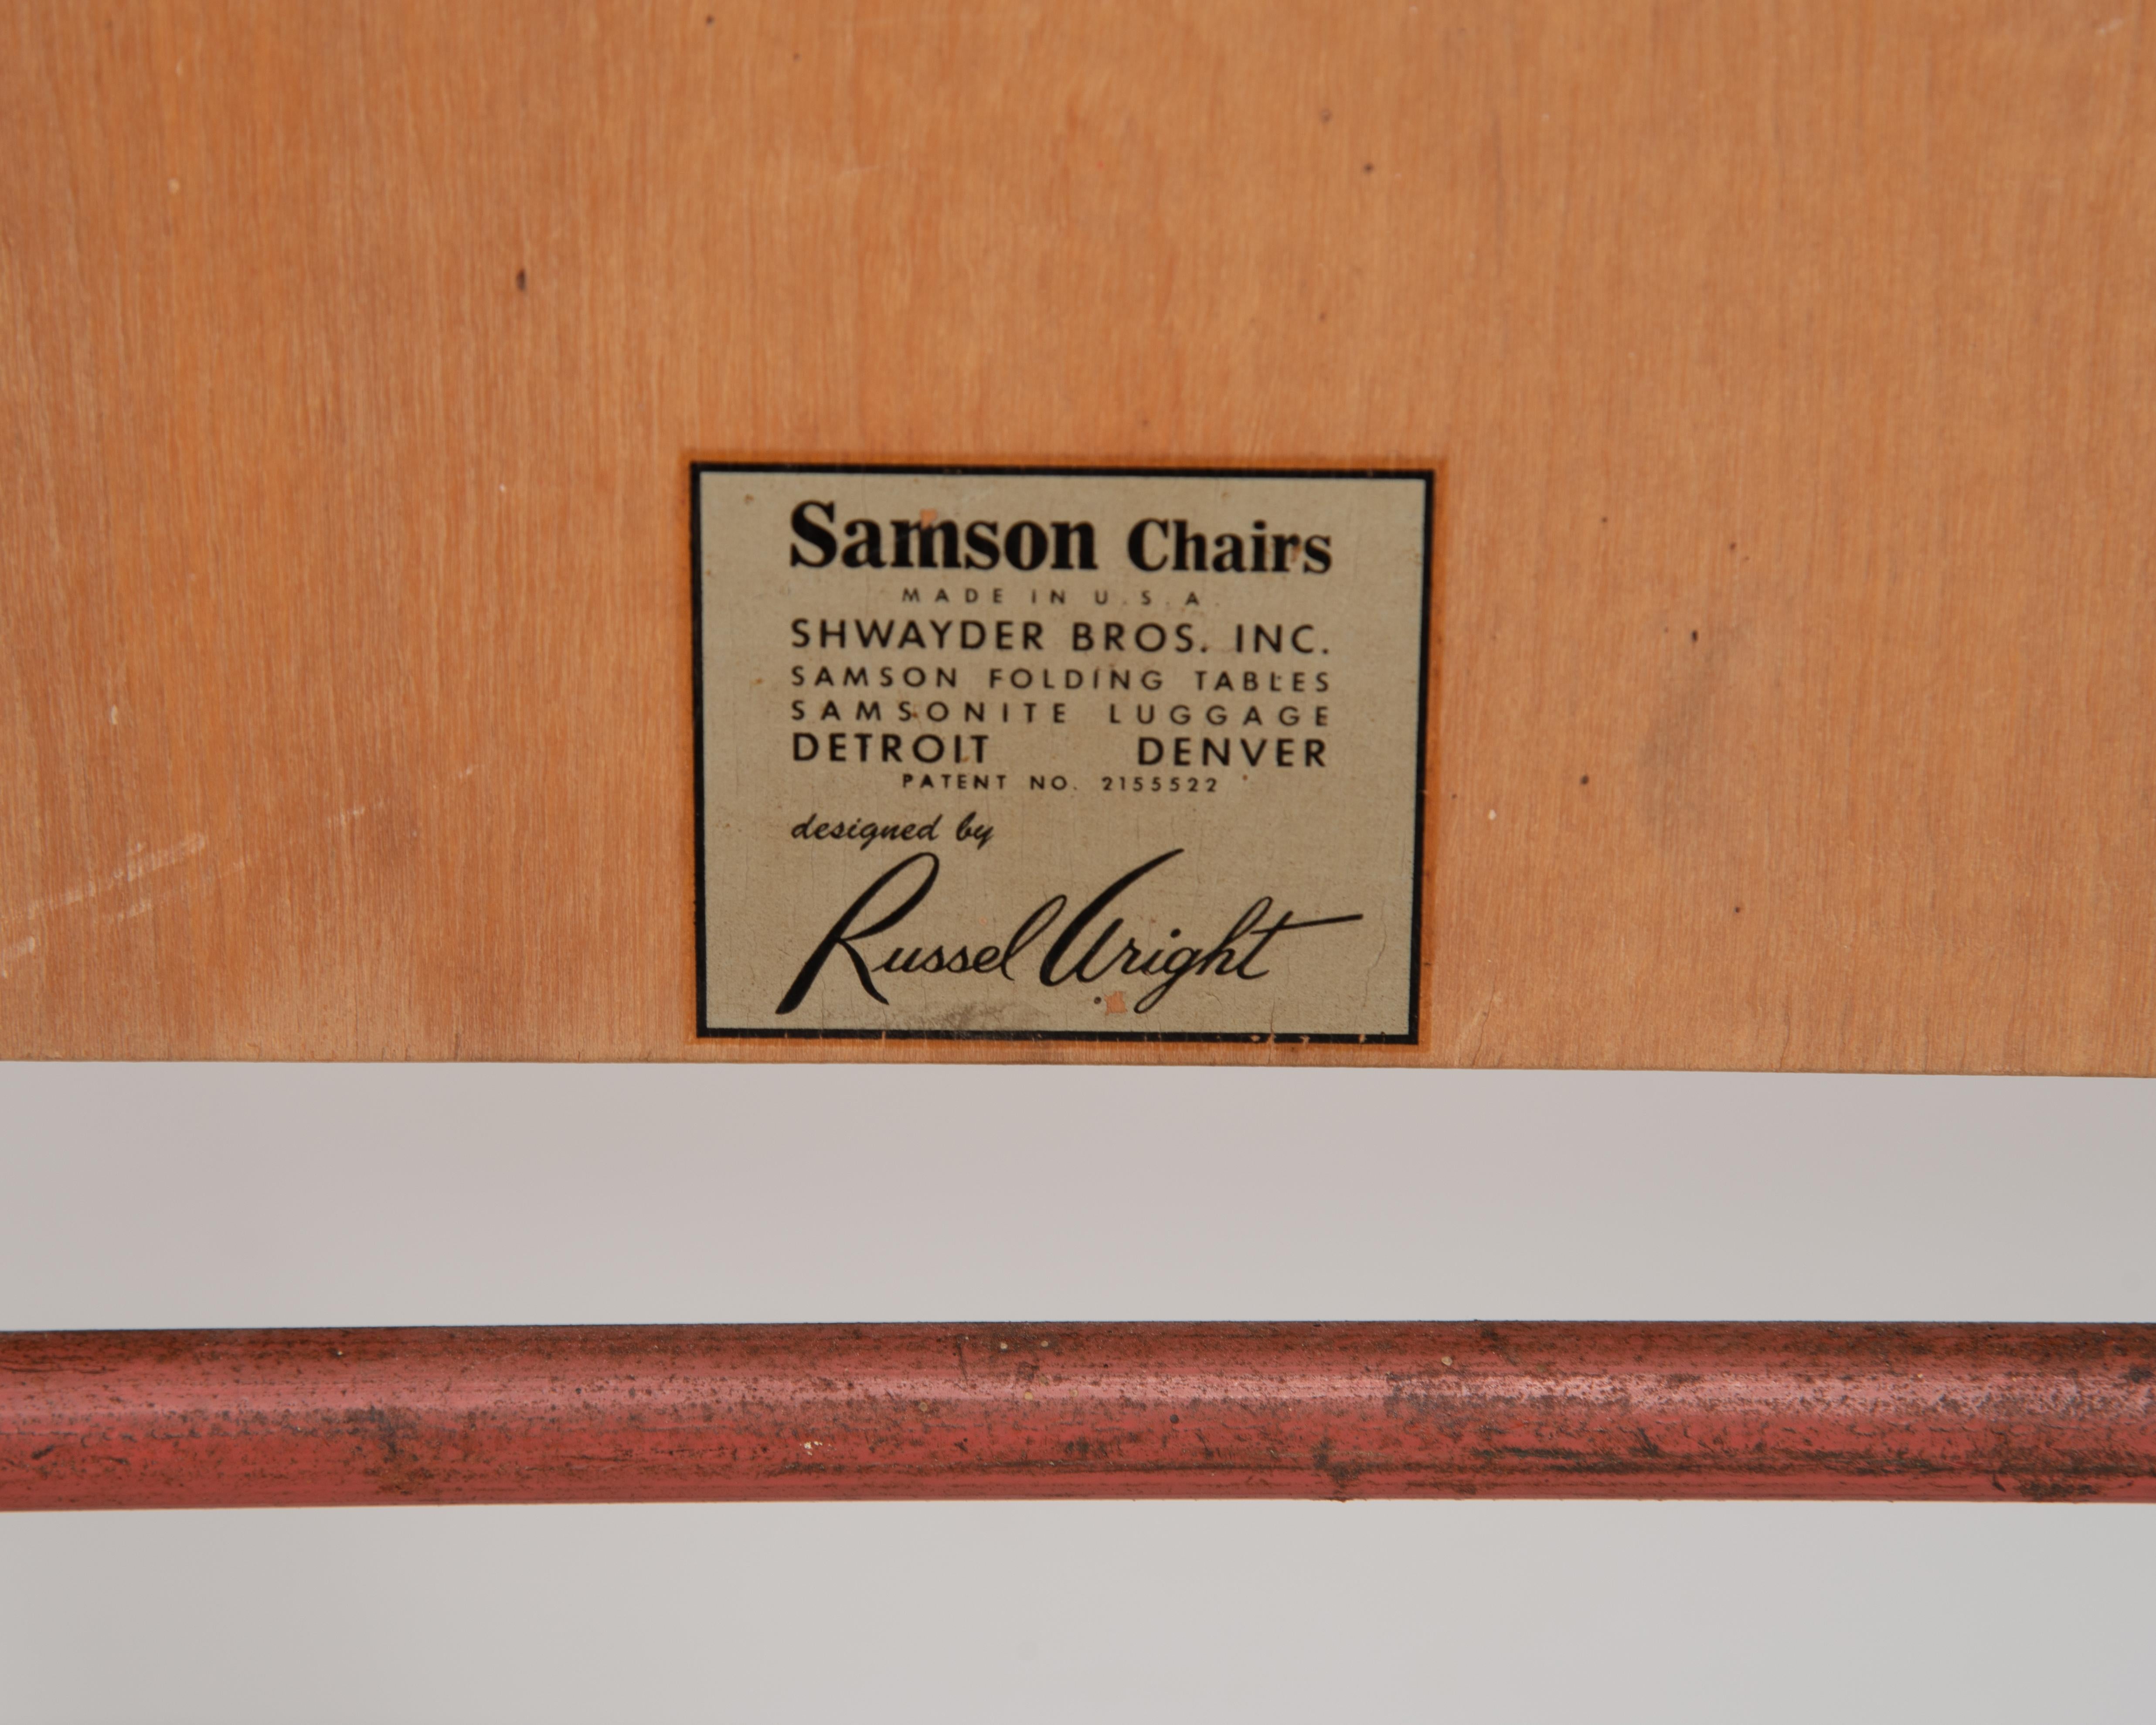 Samson Folding Chair Russel Wright Shwayder Bros Inc. 1950s For Sale 4